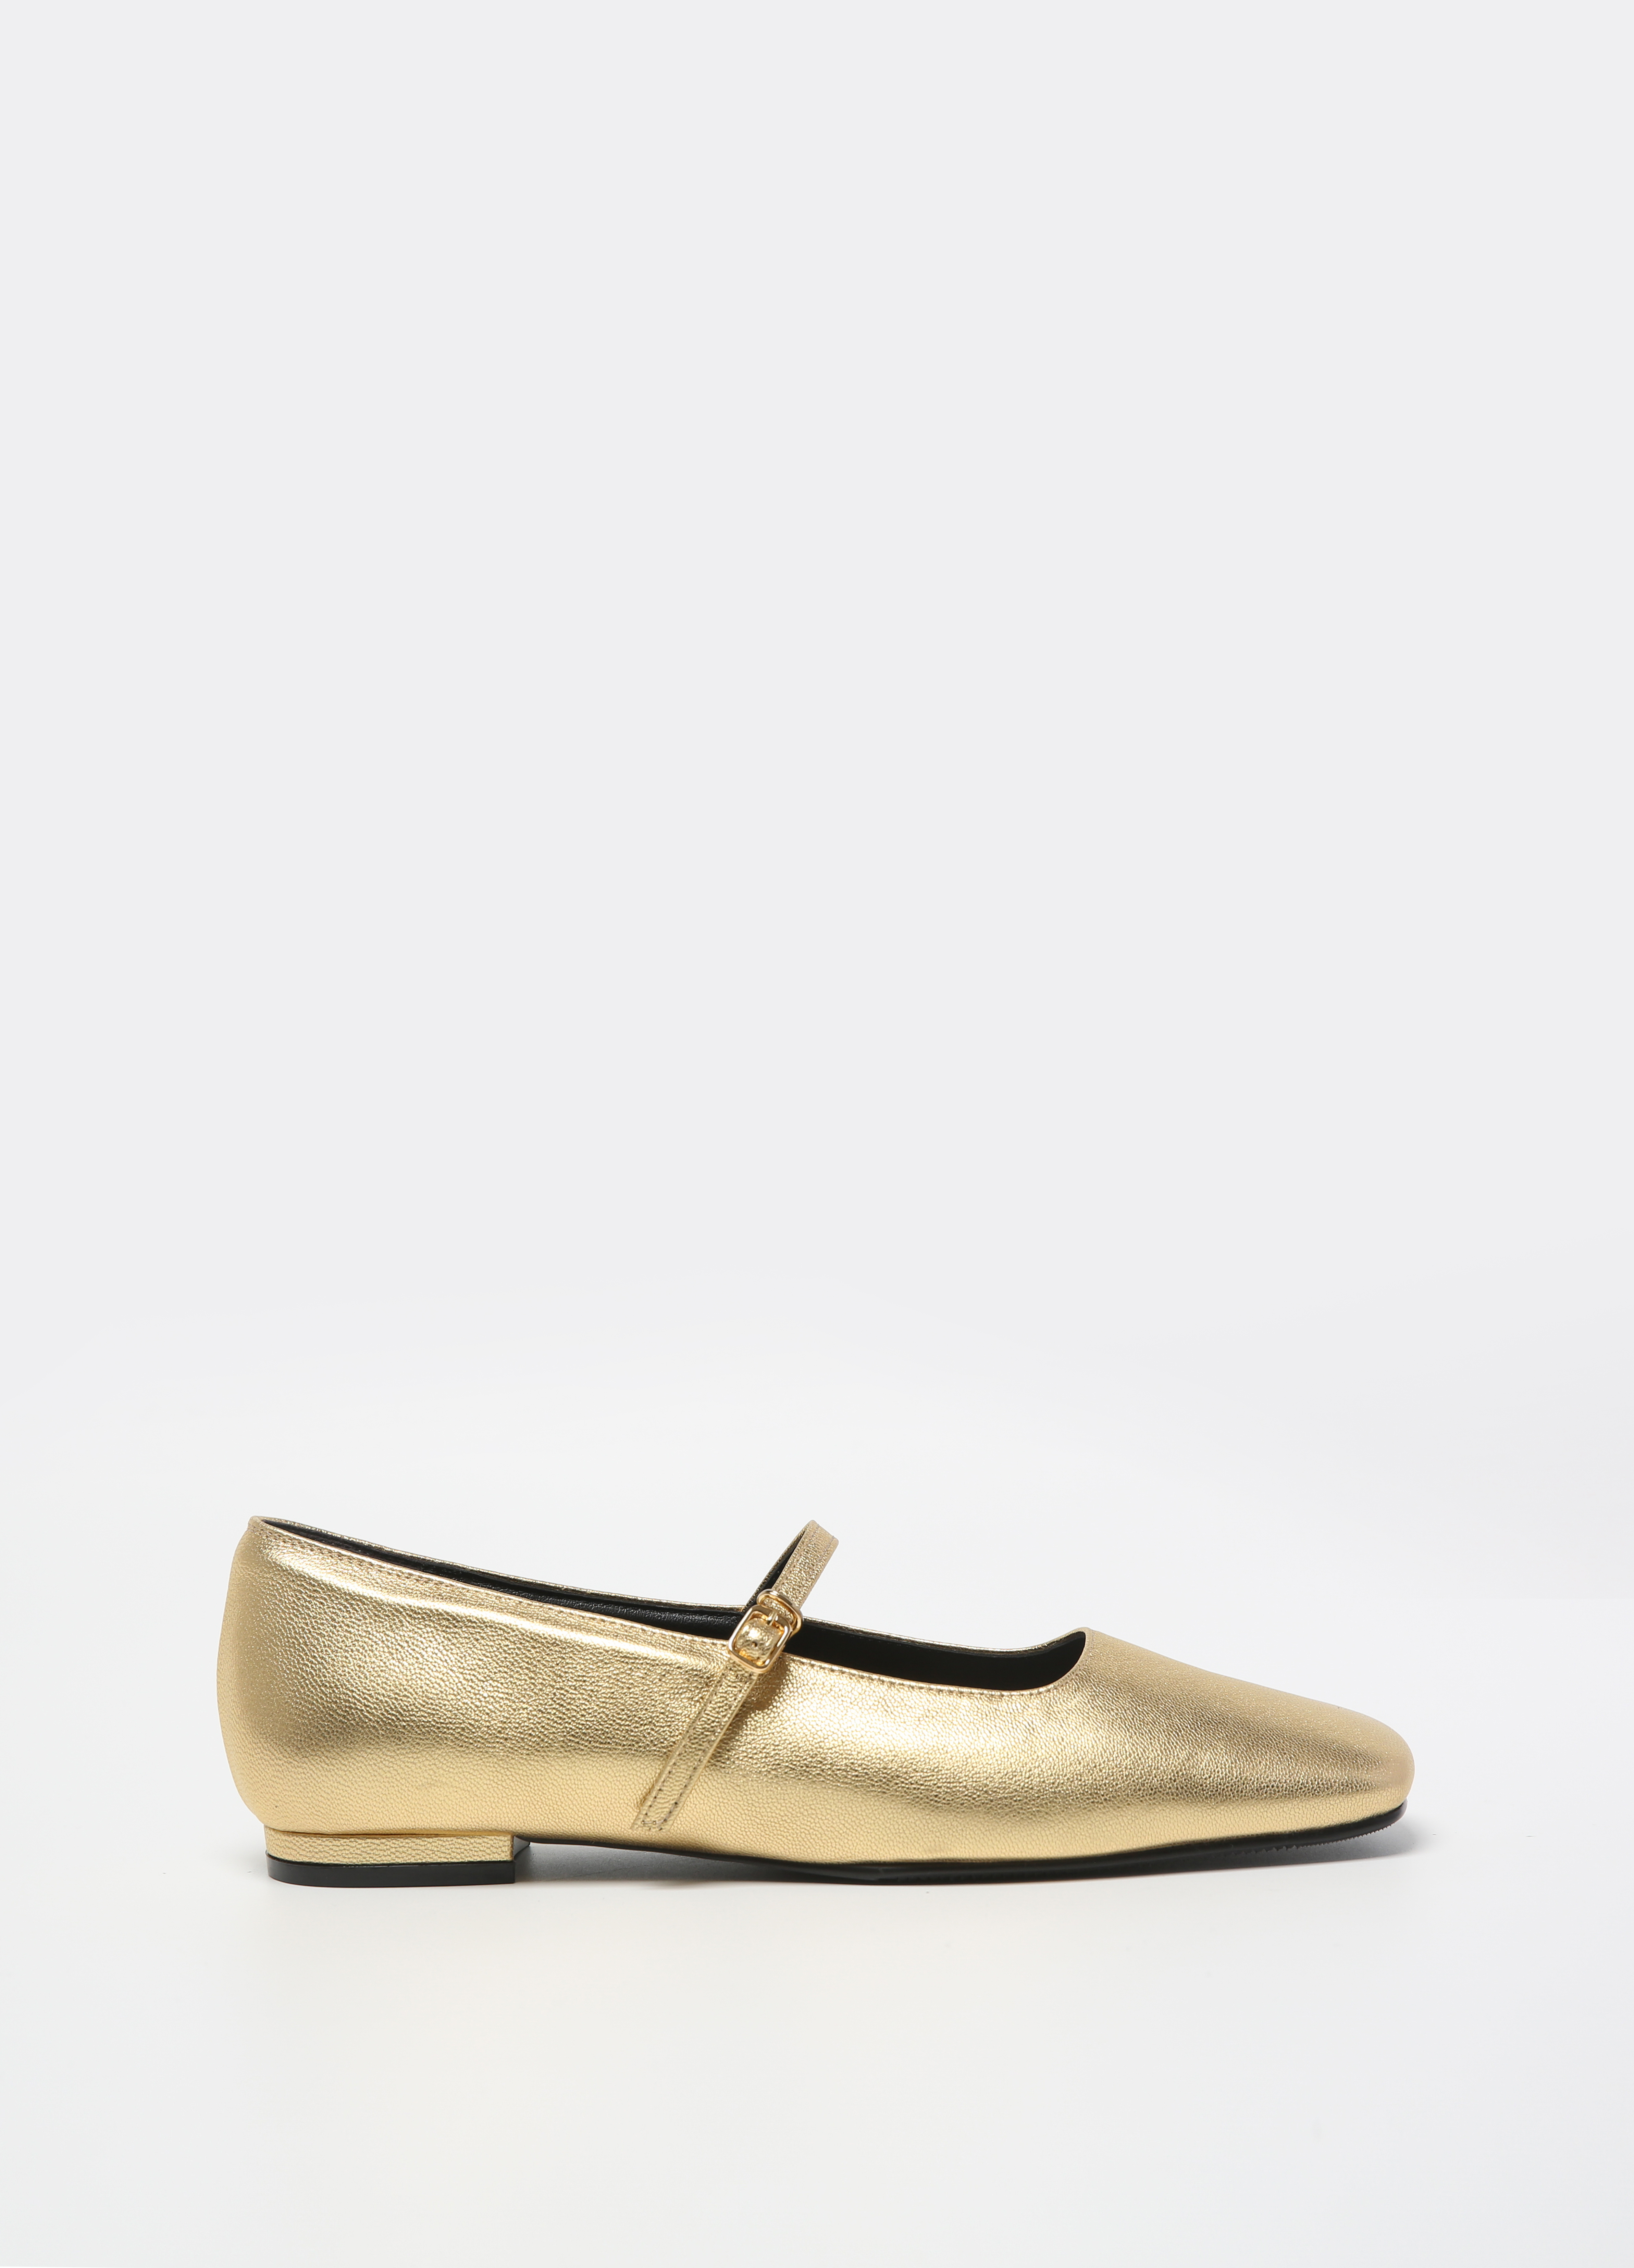 SQUARE MARY JANE FLAT (GOLD)